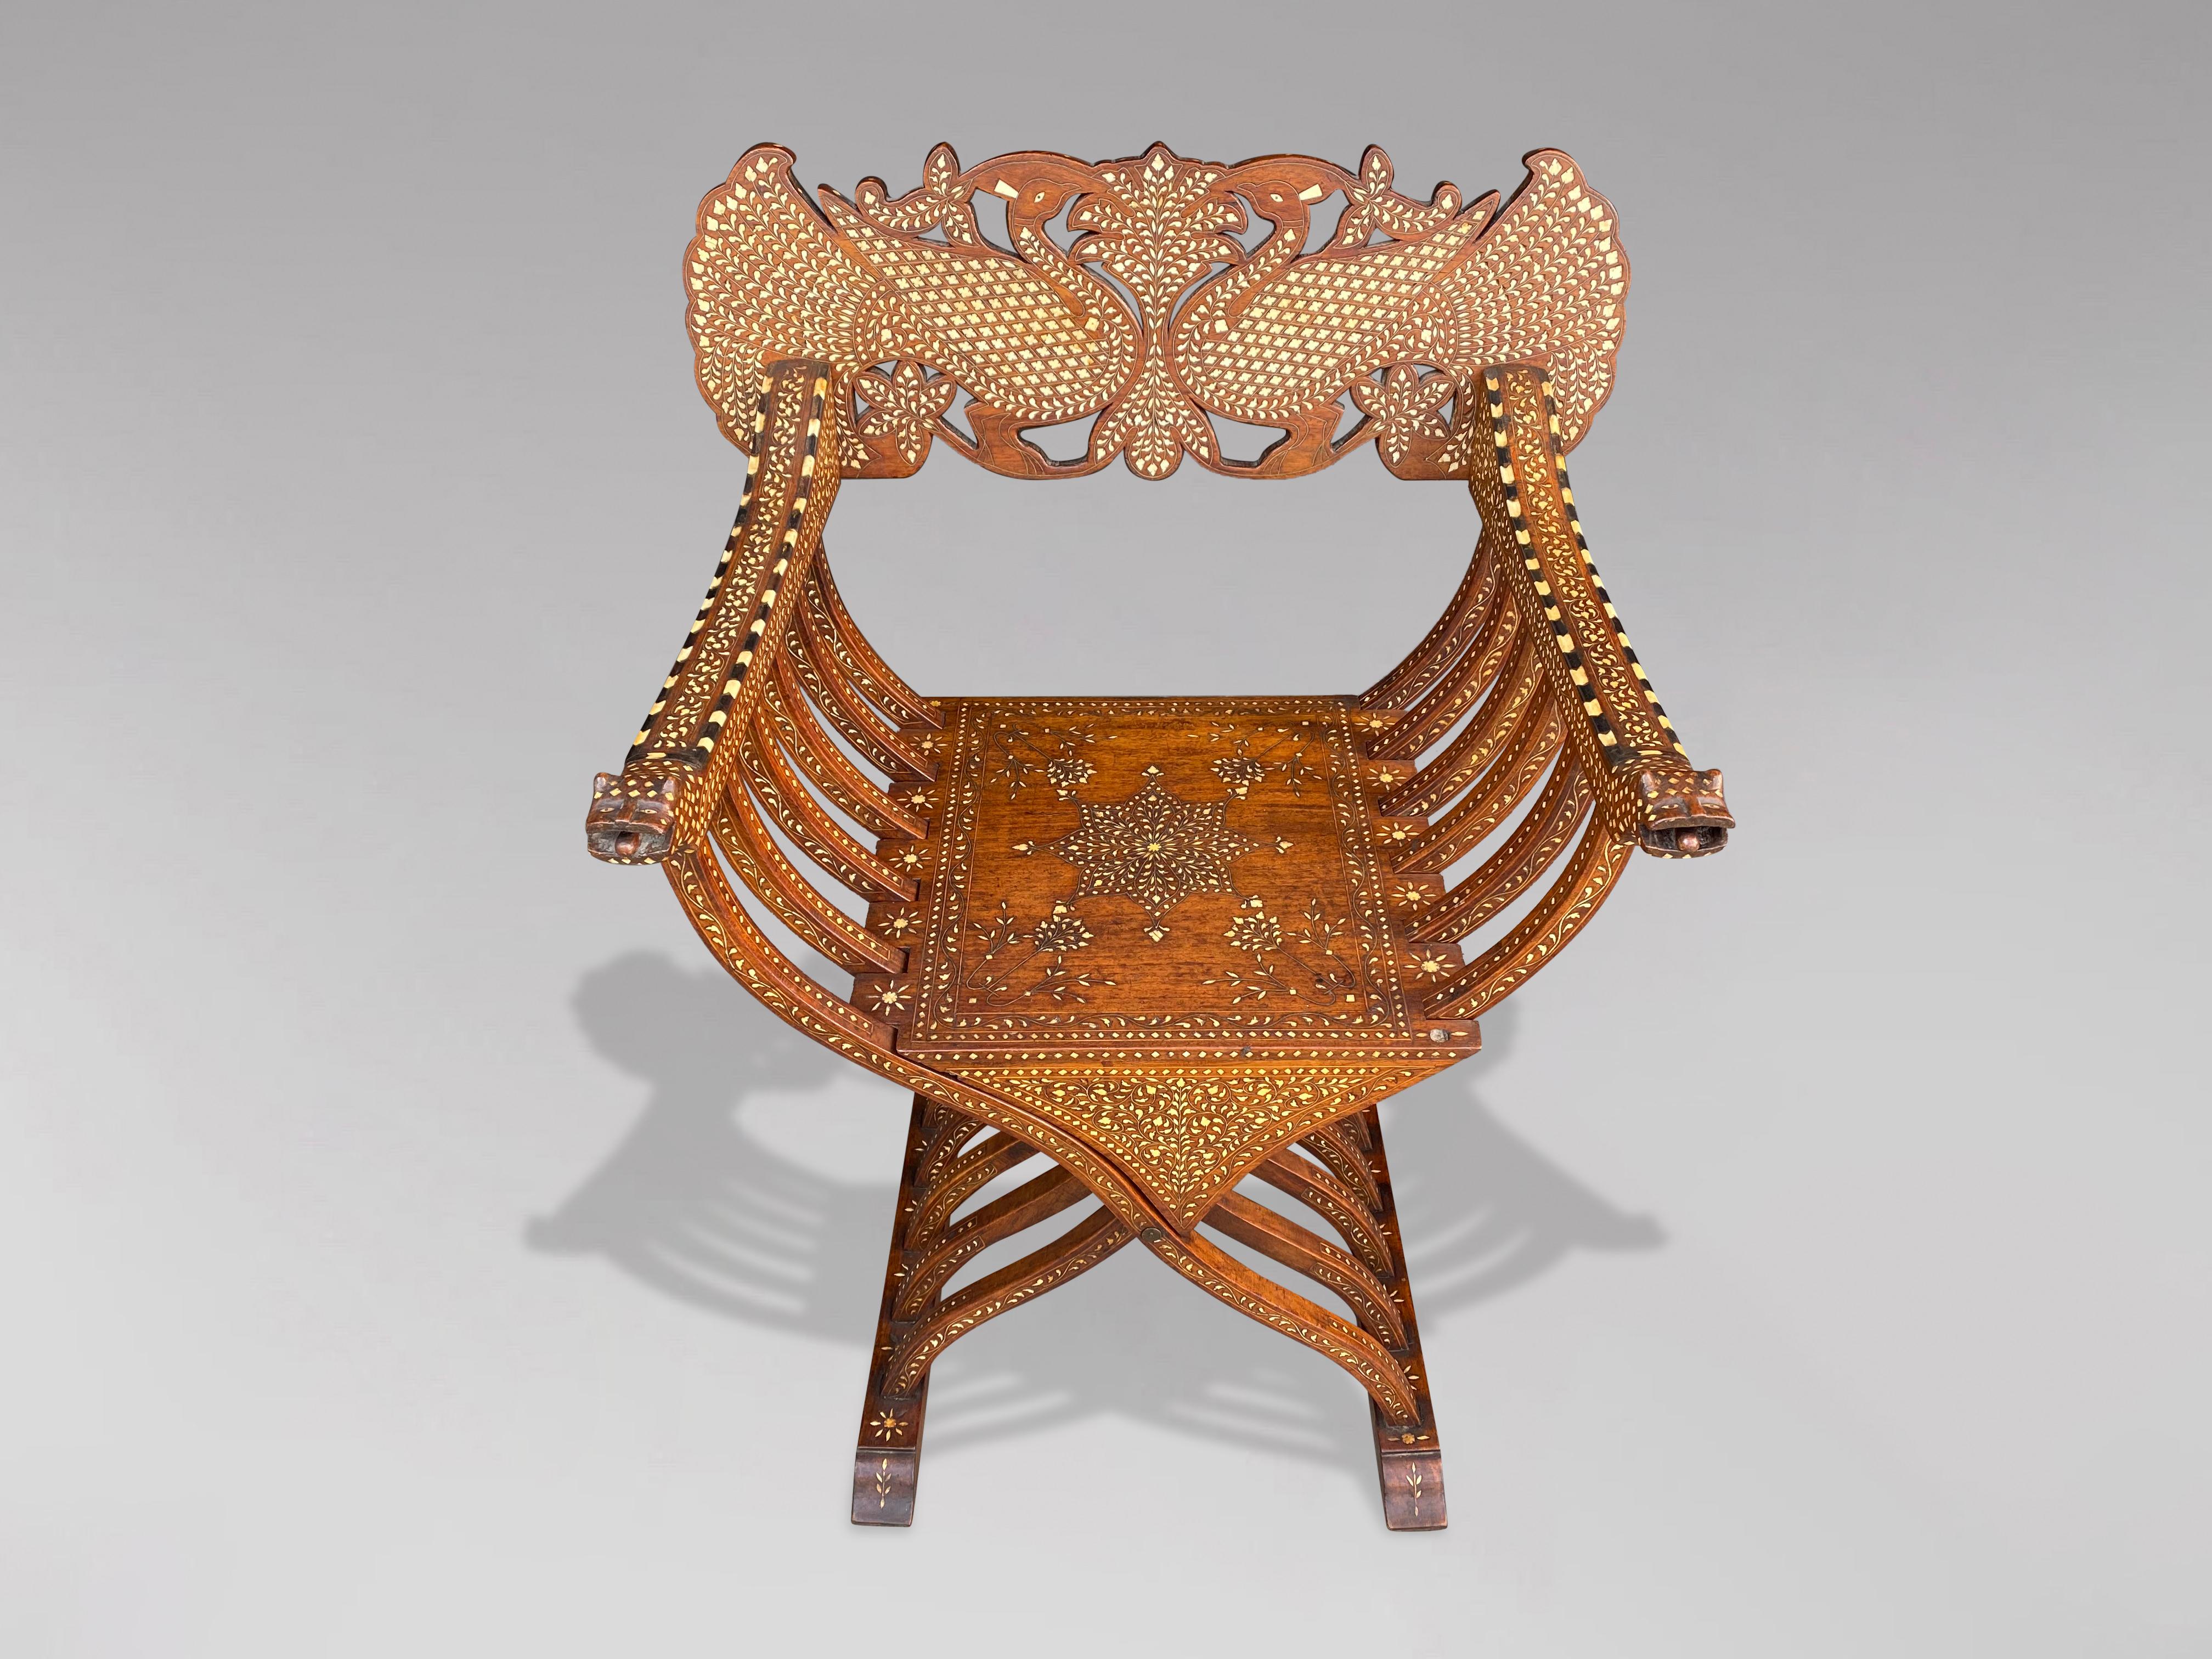 A very decorative and elaborate inlaid late 19th century folding scissors Savonarola armchair. With a carved foliate and twin peacock back rail, leopard head arms and inlaid with bone, mother of pearl, ebony and mixed woods. Great detail and good